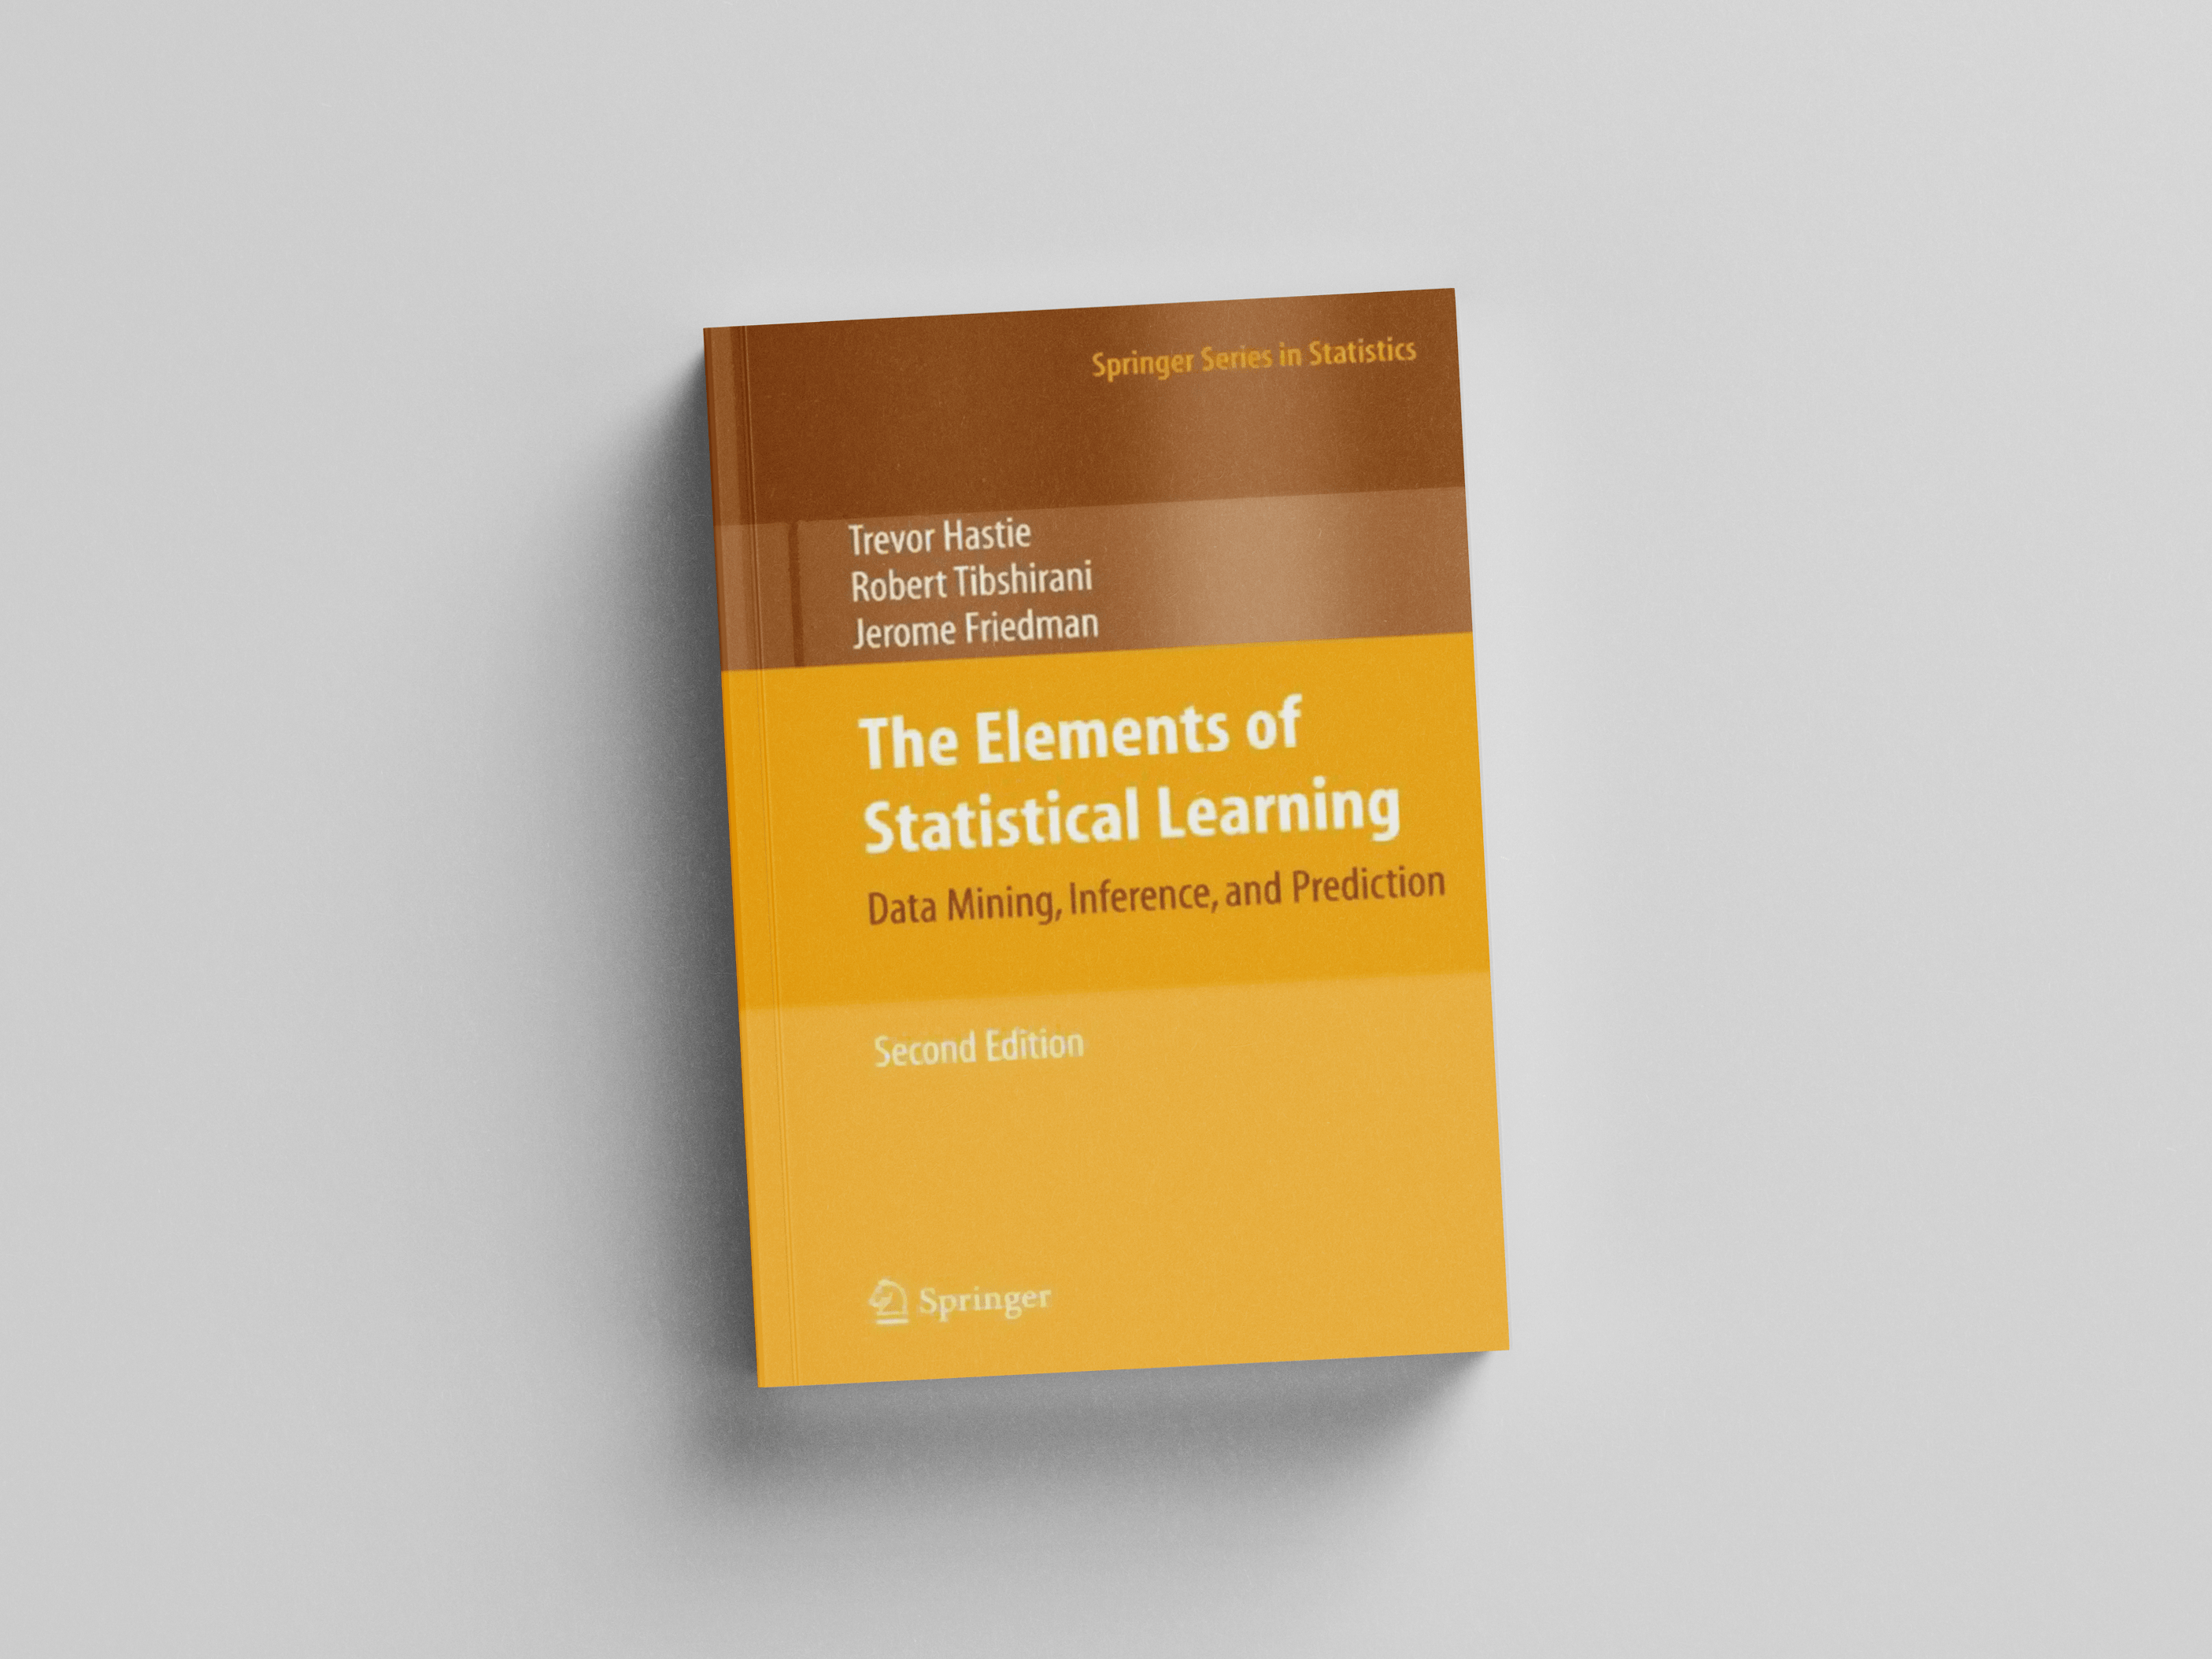 The Elements of Statistical Learning Data Mining Inference and Prediction Second Edition (Springer Series in Statistics)